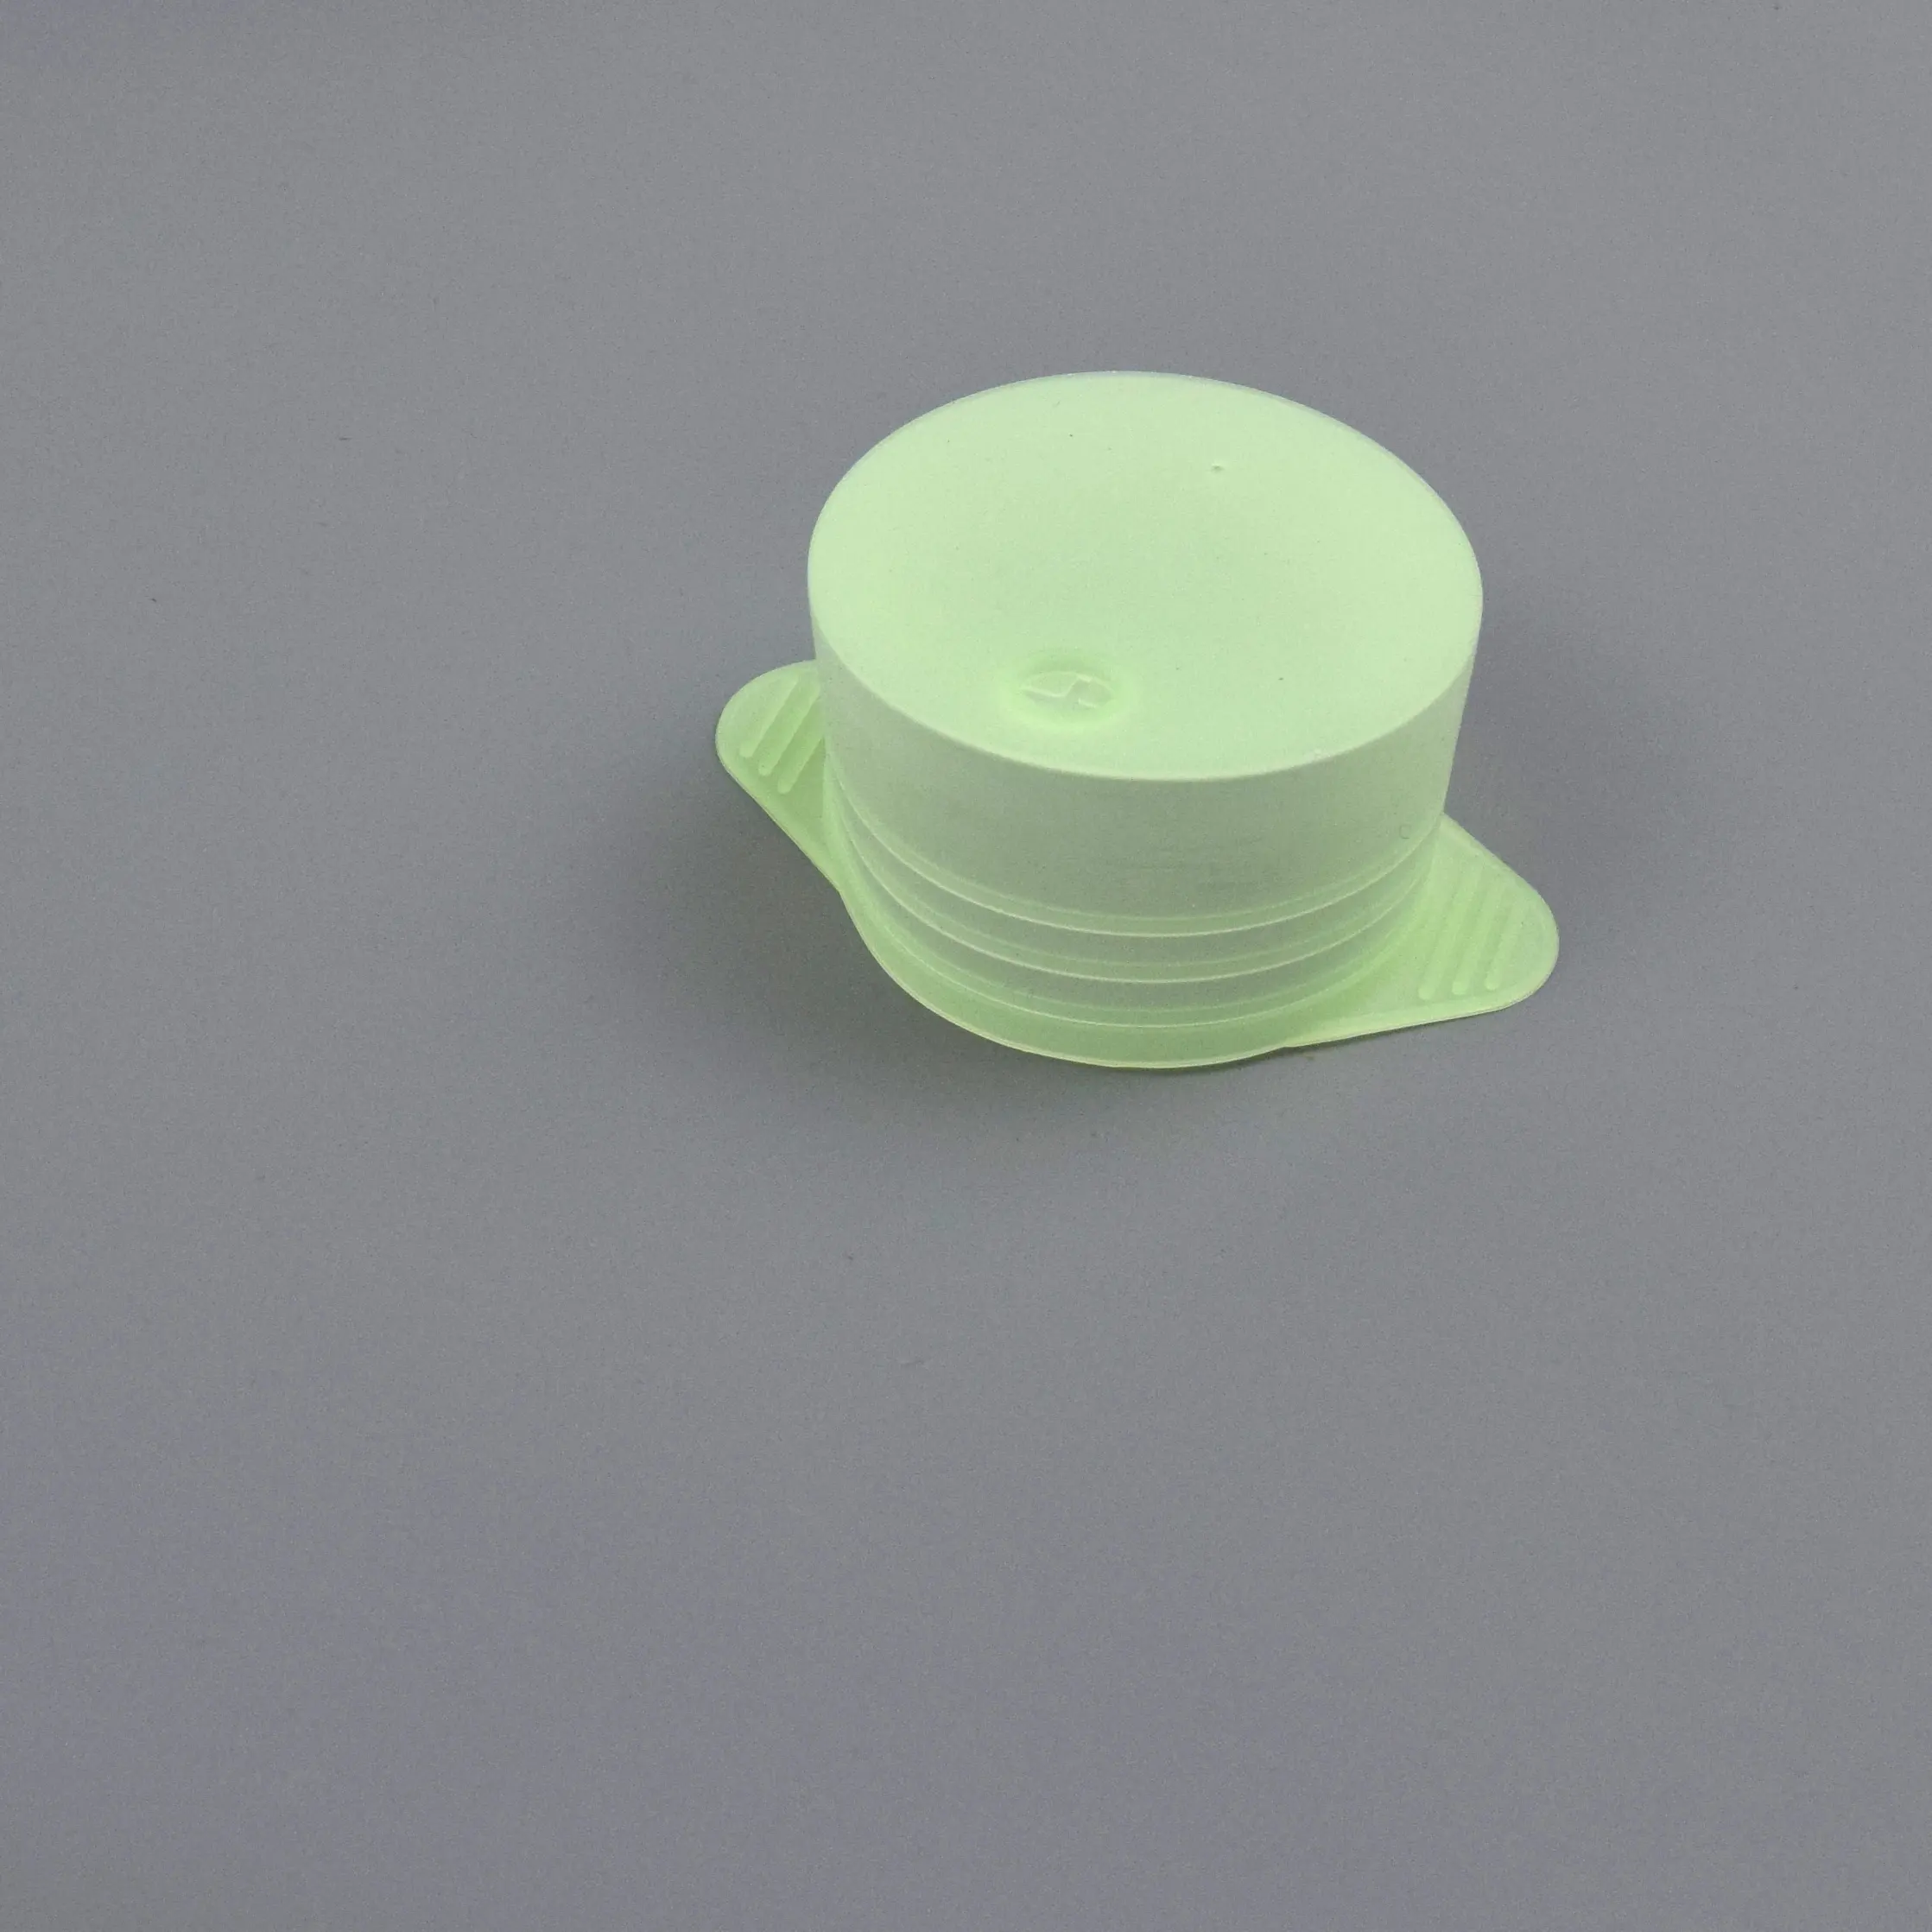 New Arrival Reusable Anti-drug Stretch Protection Silicone Cup Cover Lid Condom For Club Party